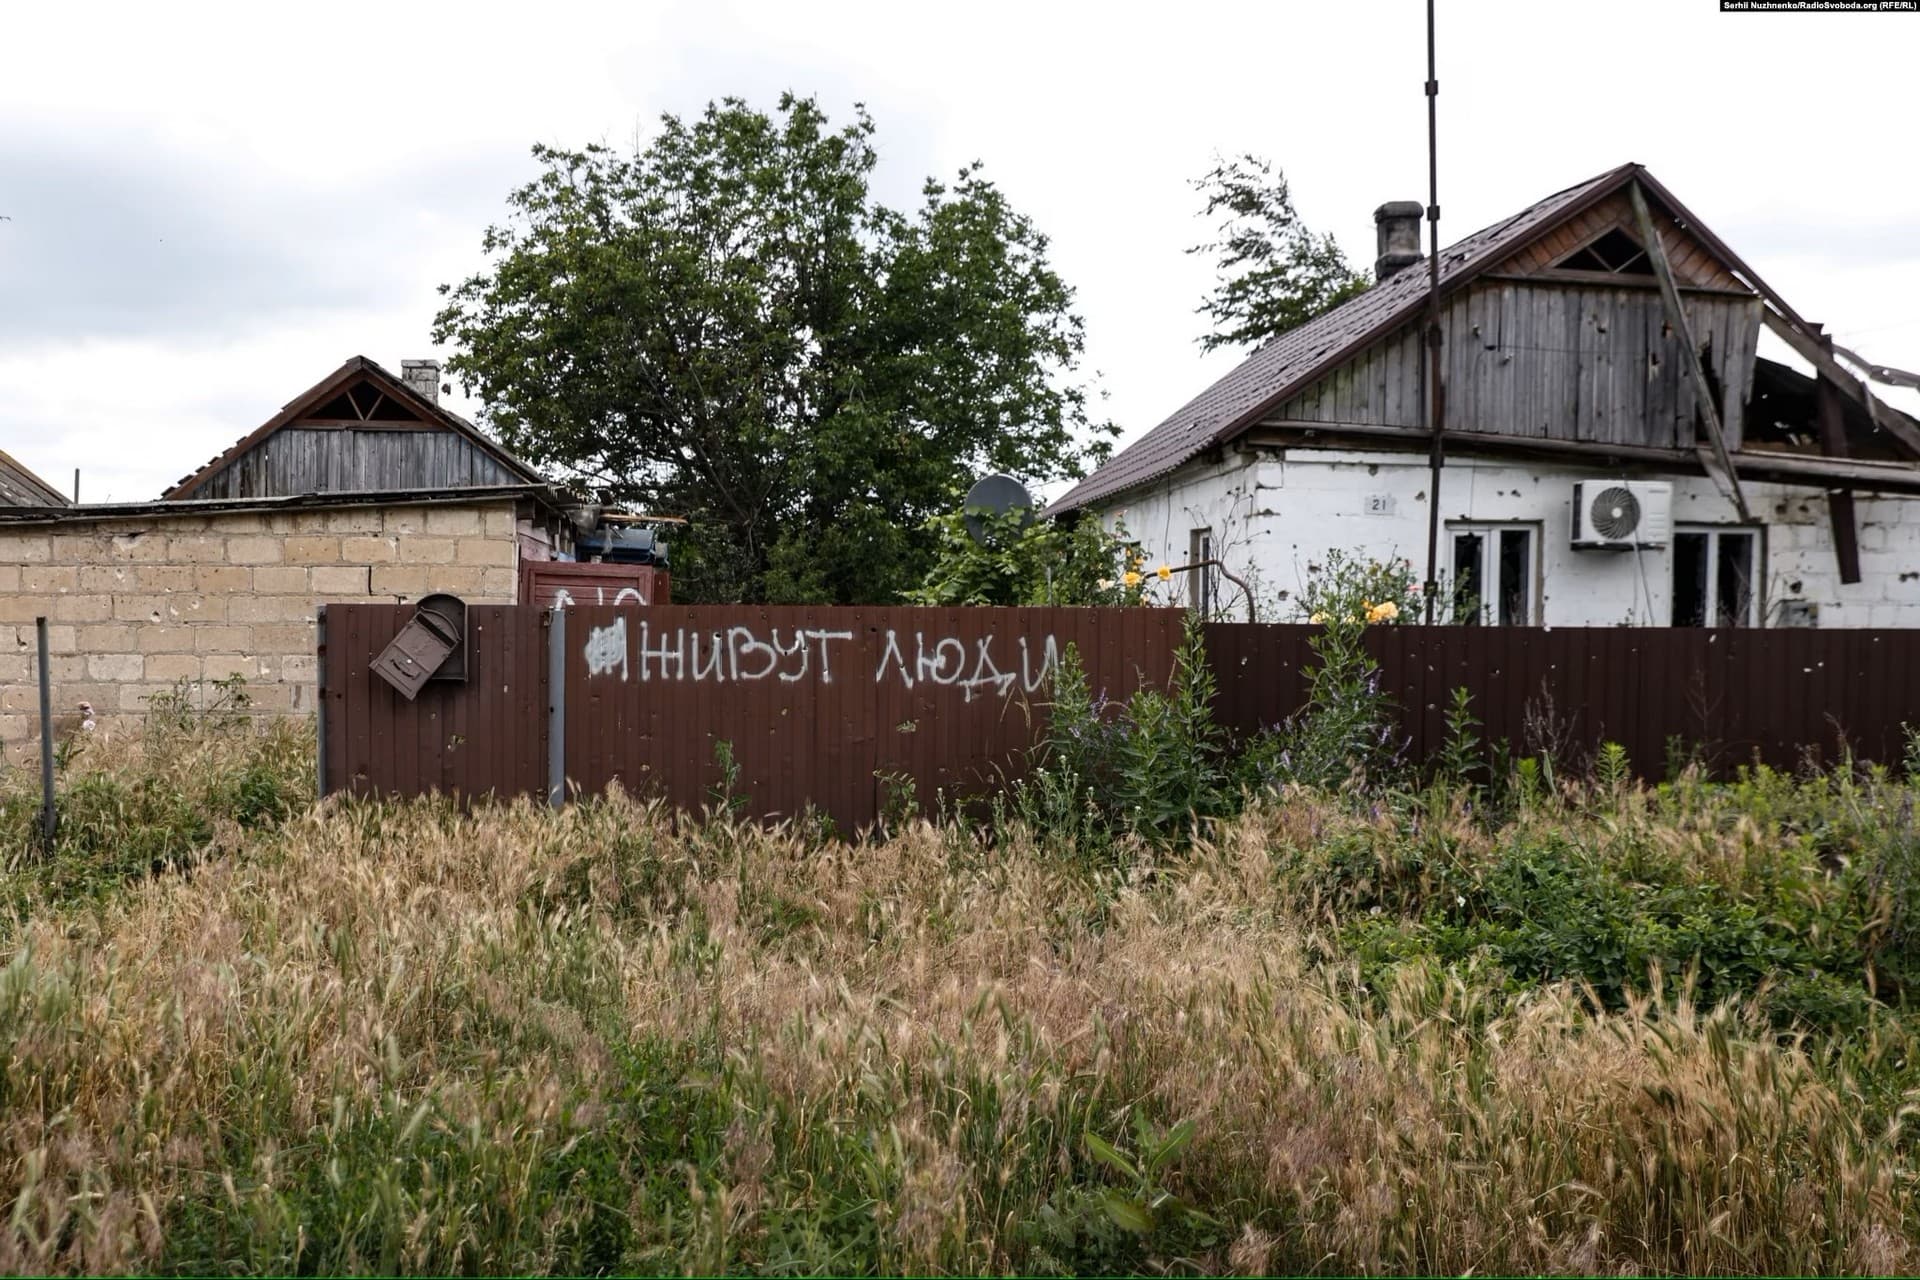 Graffiti on a fence in Blahodatne that roughly translates as 'People live here'